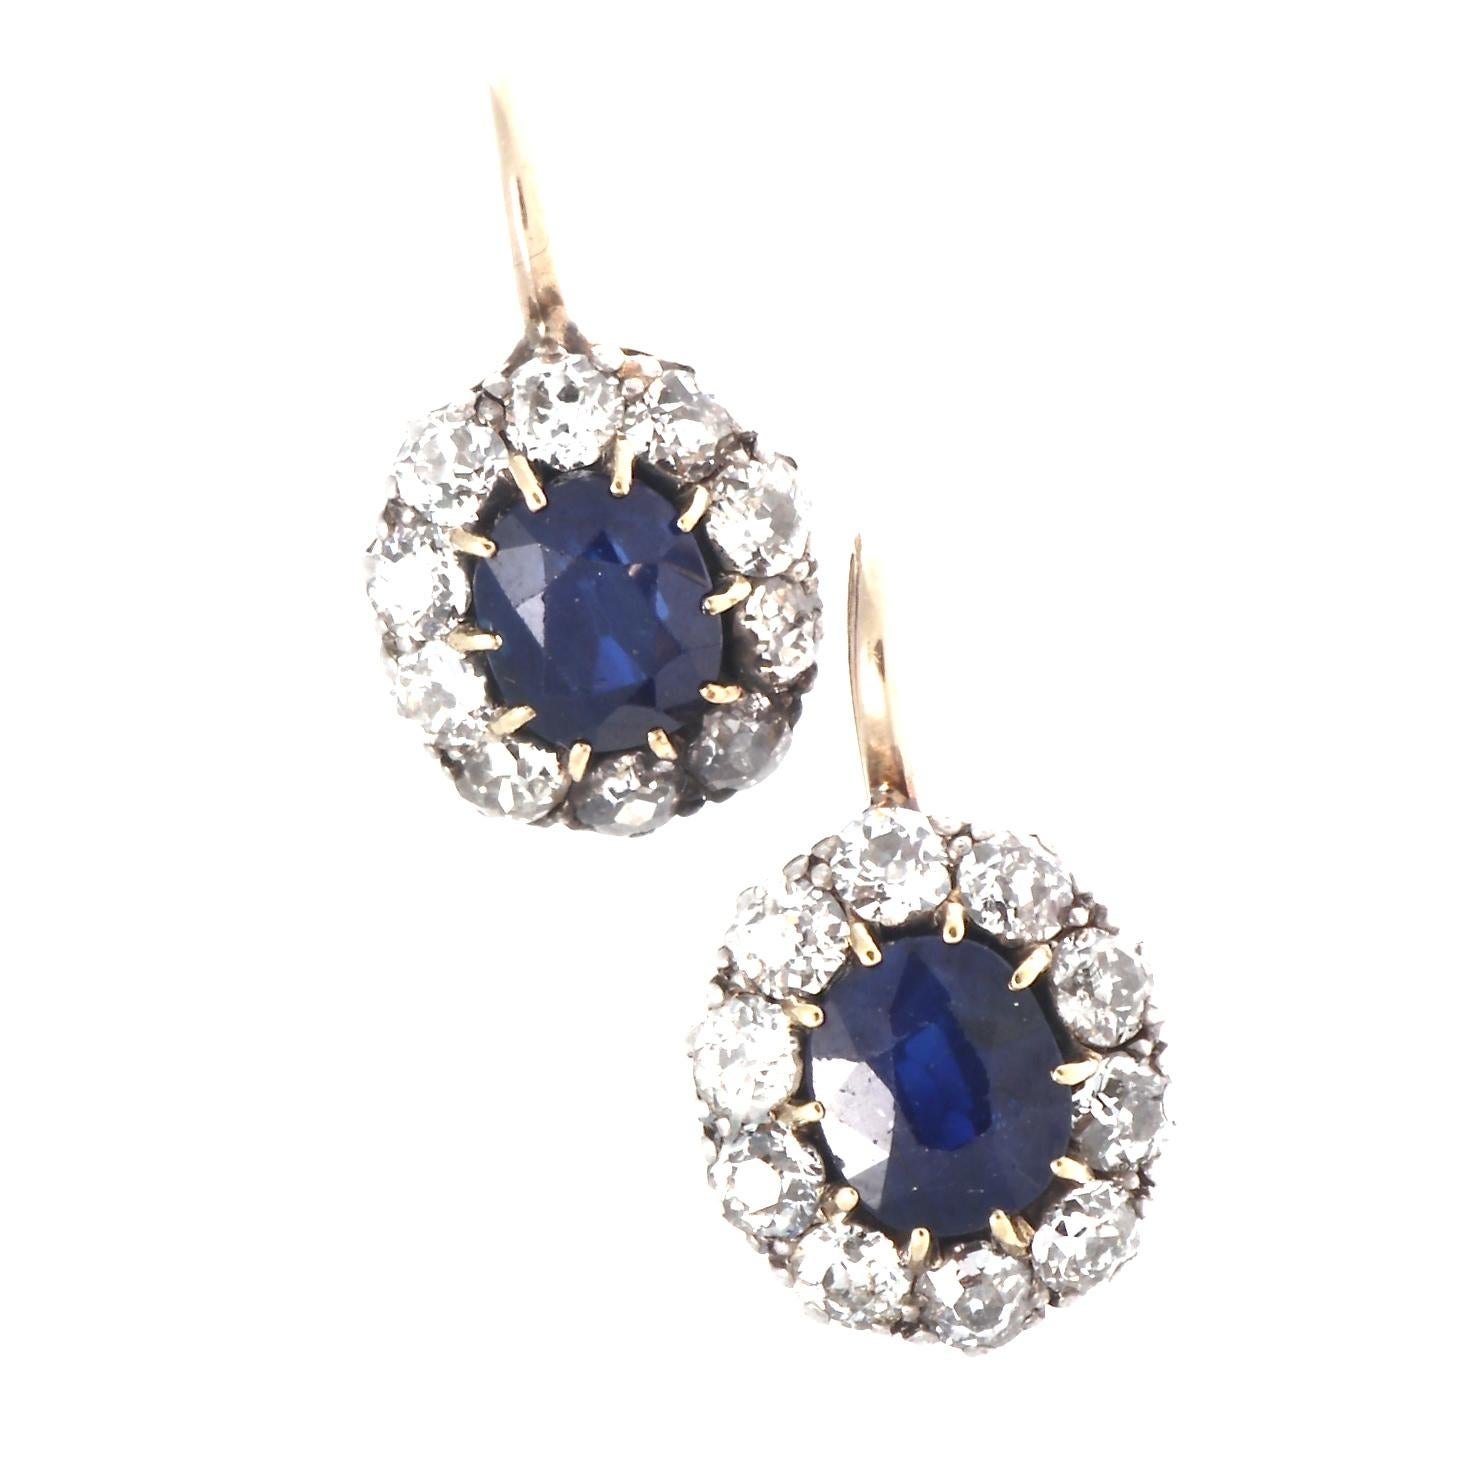 Oval Cut Authentic Victorian GIA Certified Sapphire Diamond 14 Karat Gold Cluster Earring